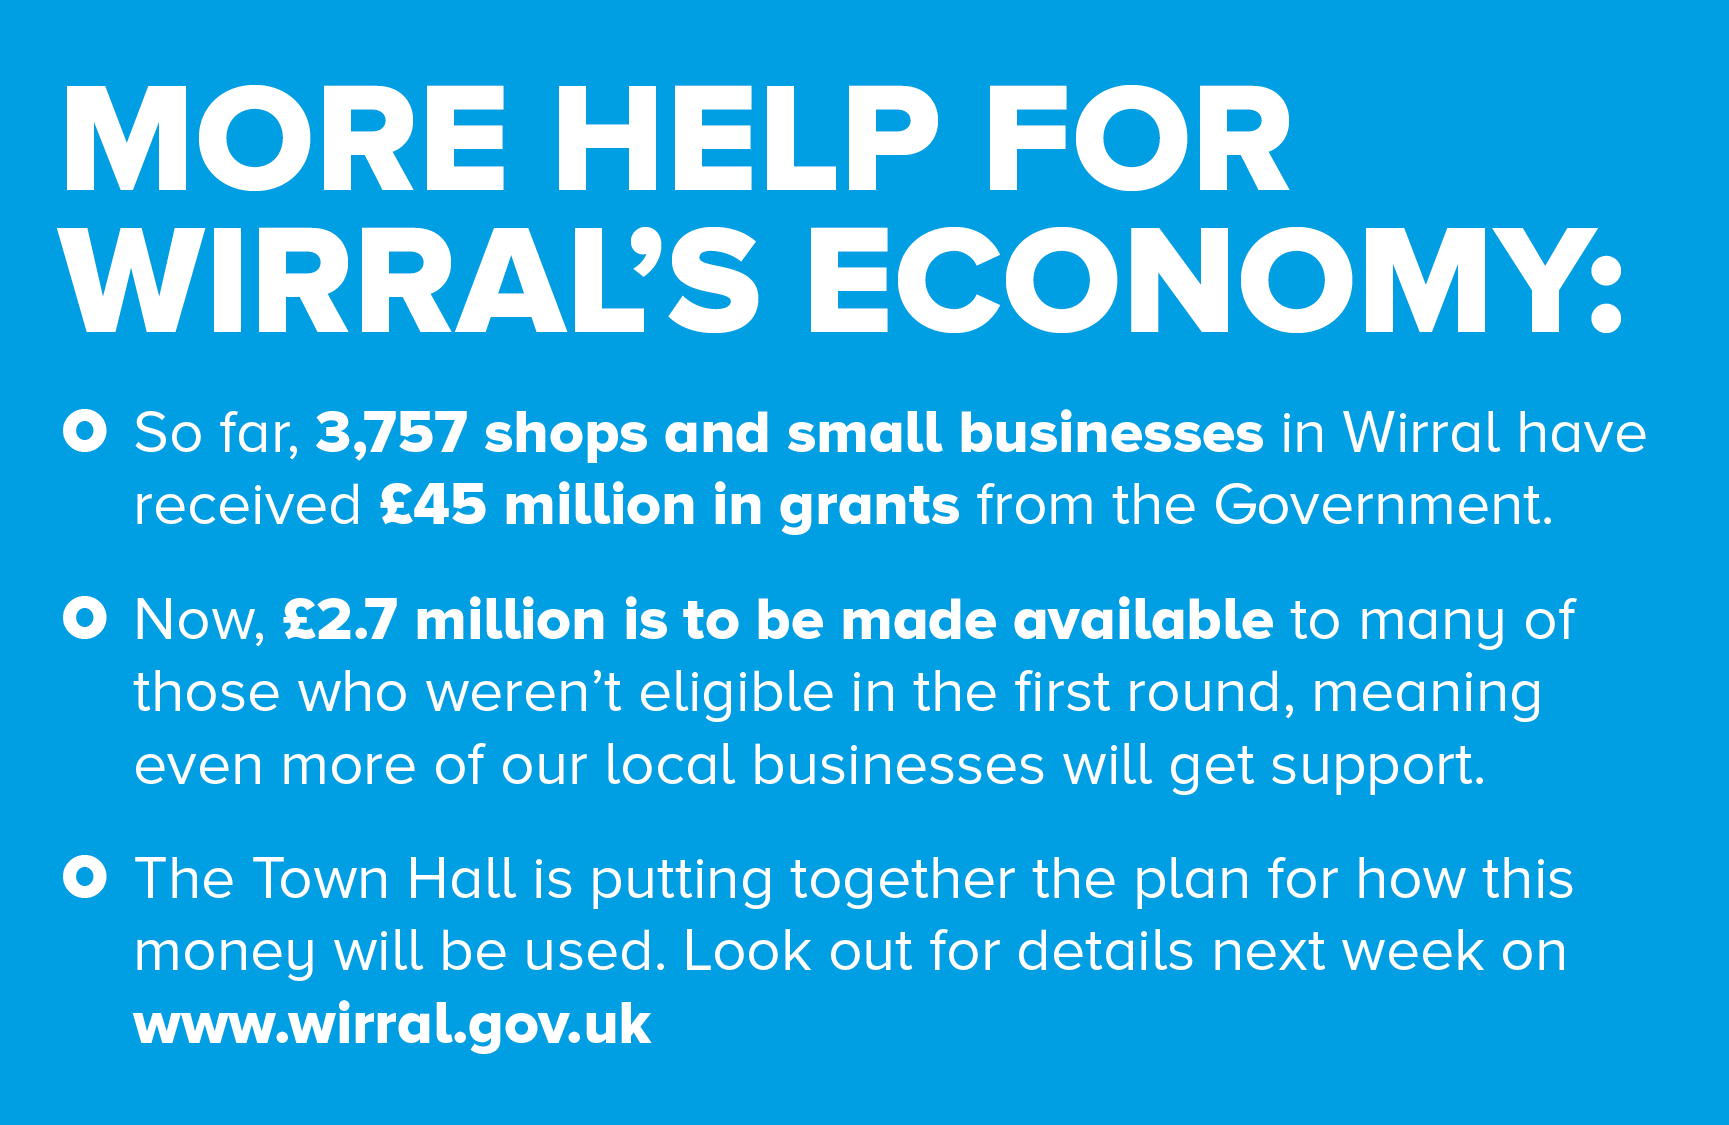 details of more help for Wirral's economy